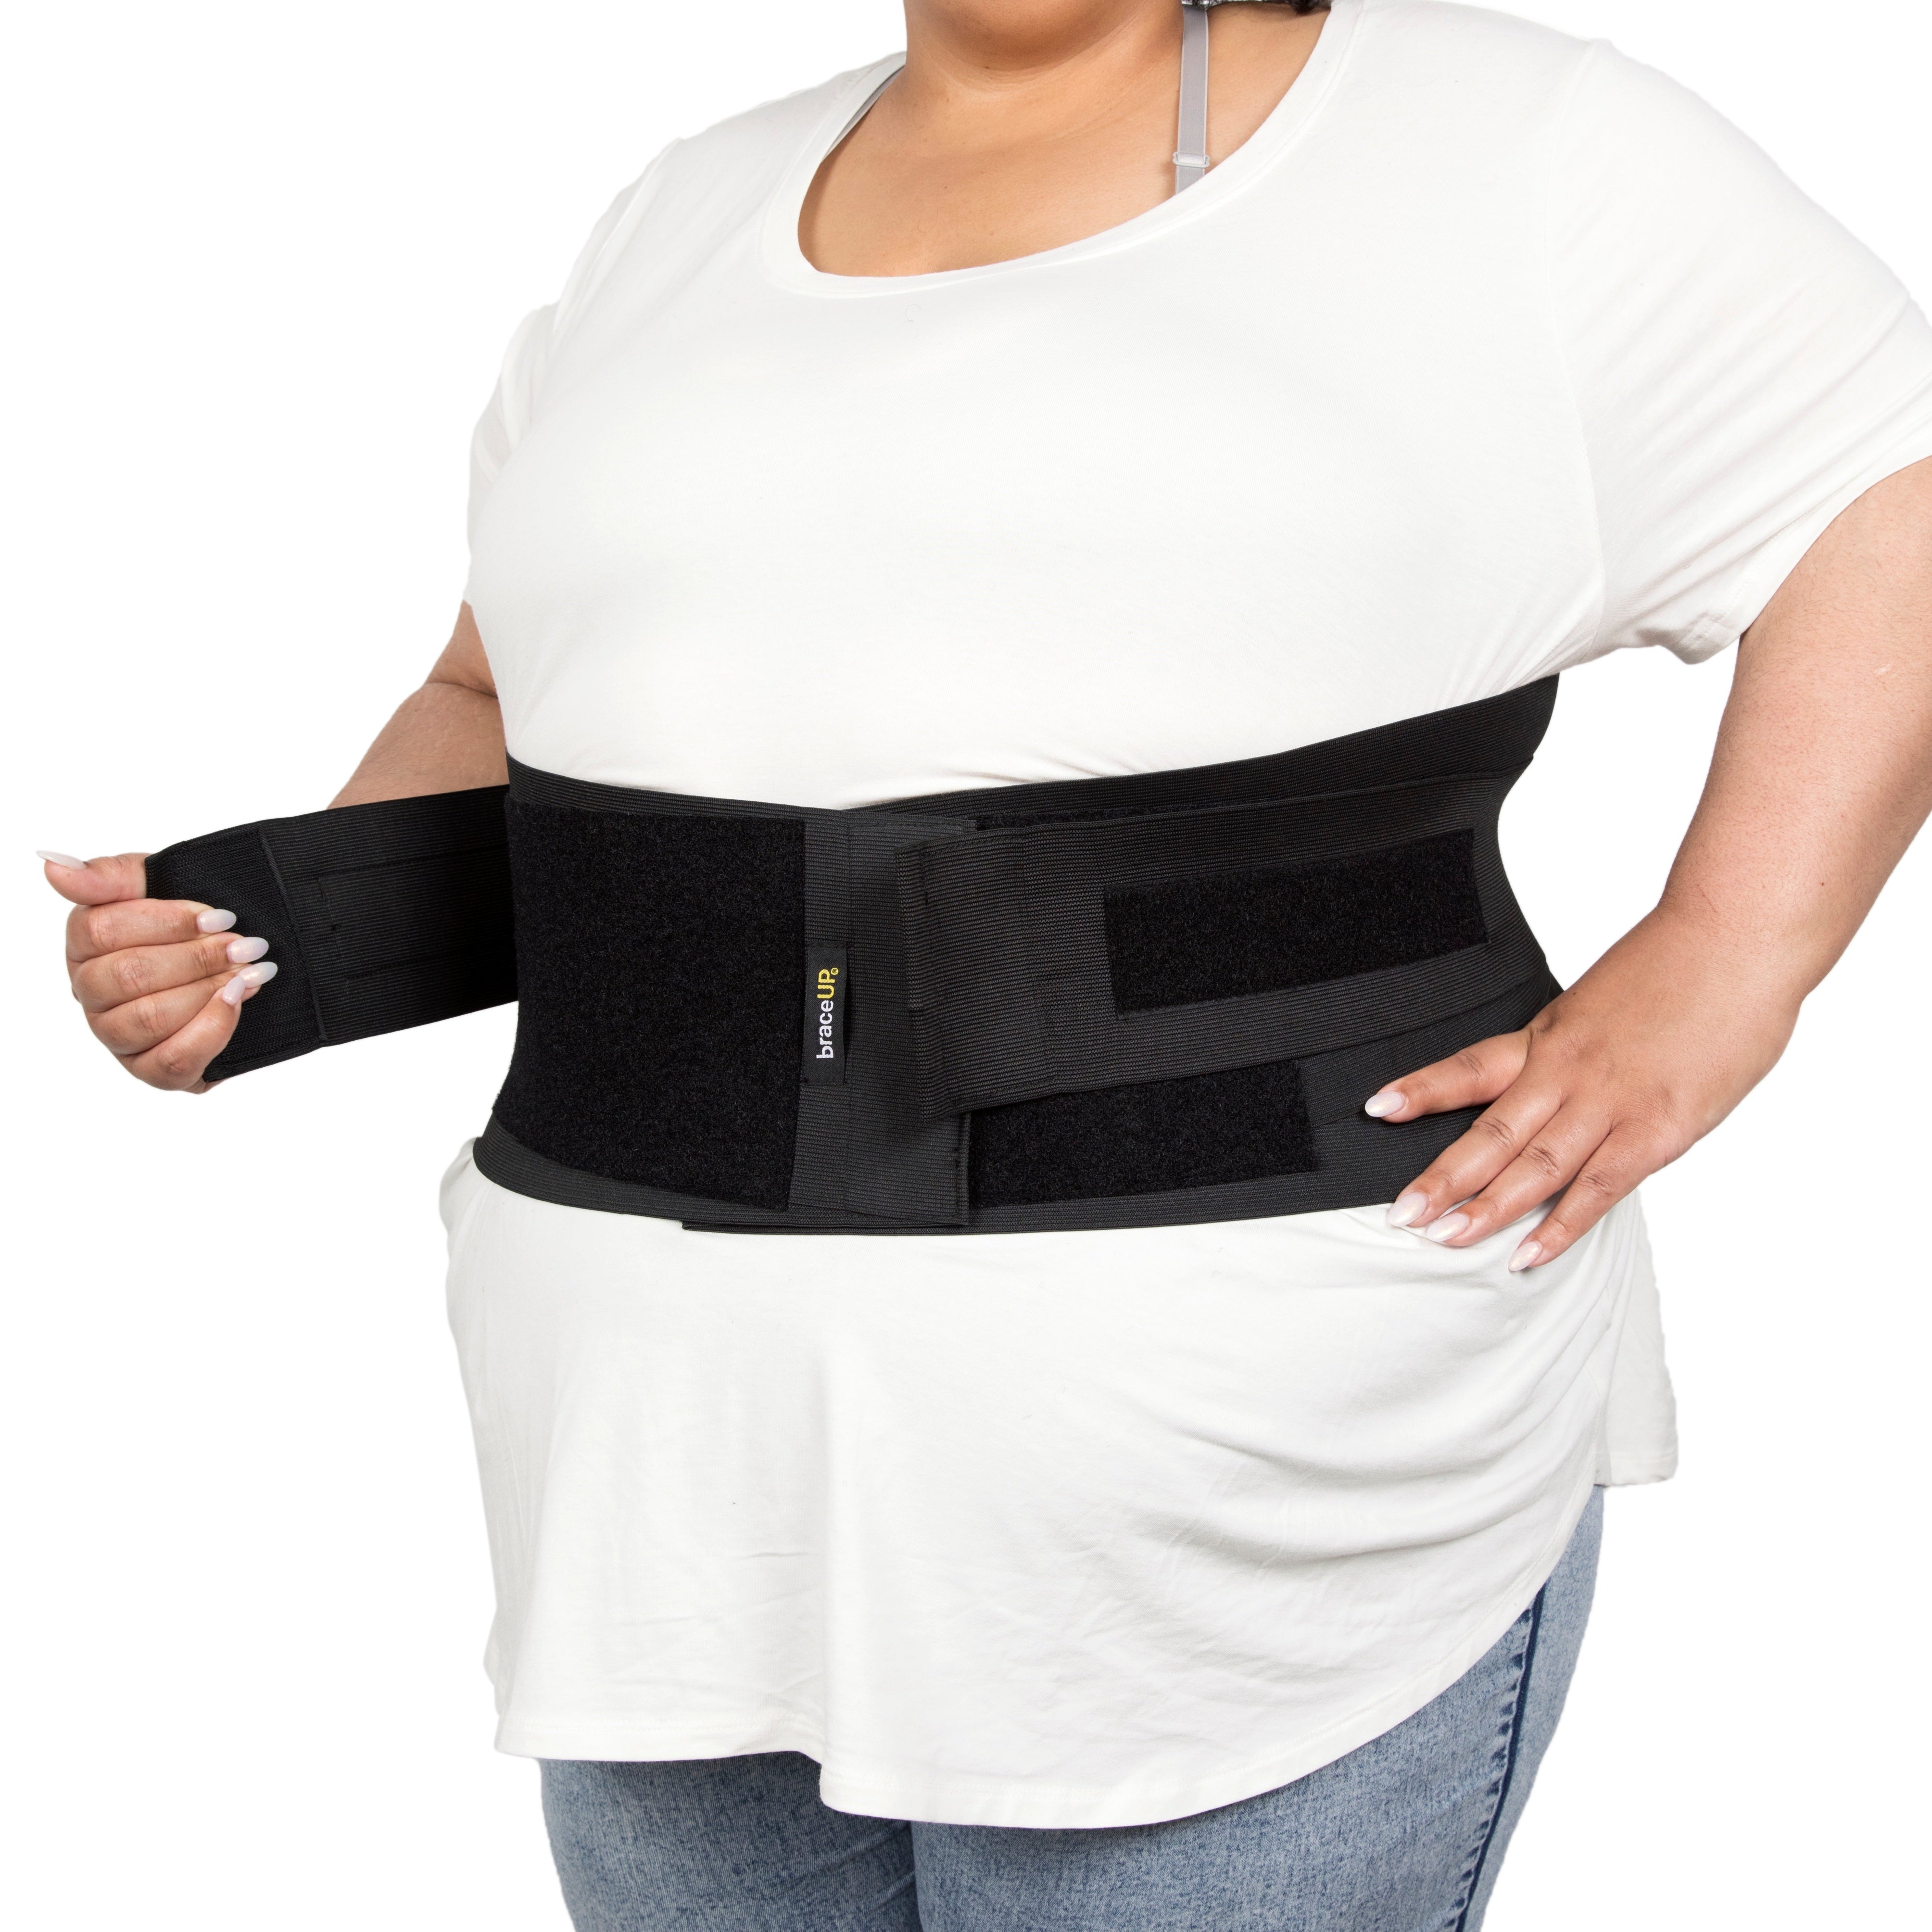  BraceAbility Plus Size 4XL Bariatric Back Brace - XXXXL Big  And Tall Lumbar Support Girdle For Obesity Lower Back Pain In Extra Large,  Heavy Or Overweight Men And Women